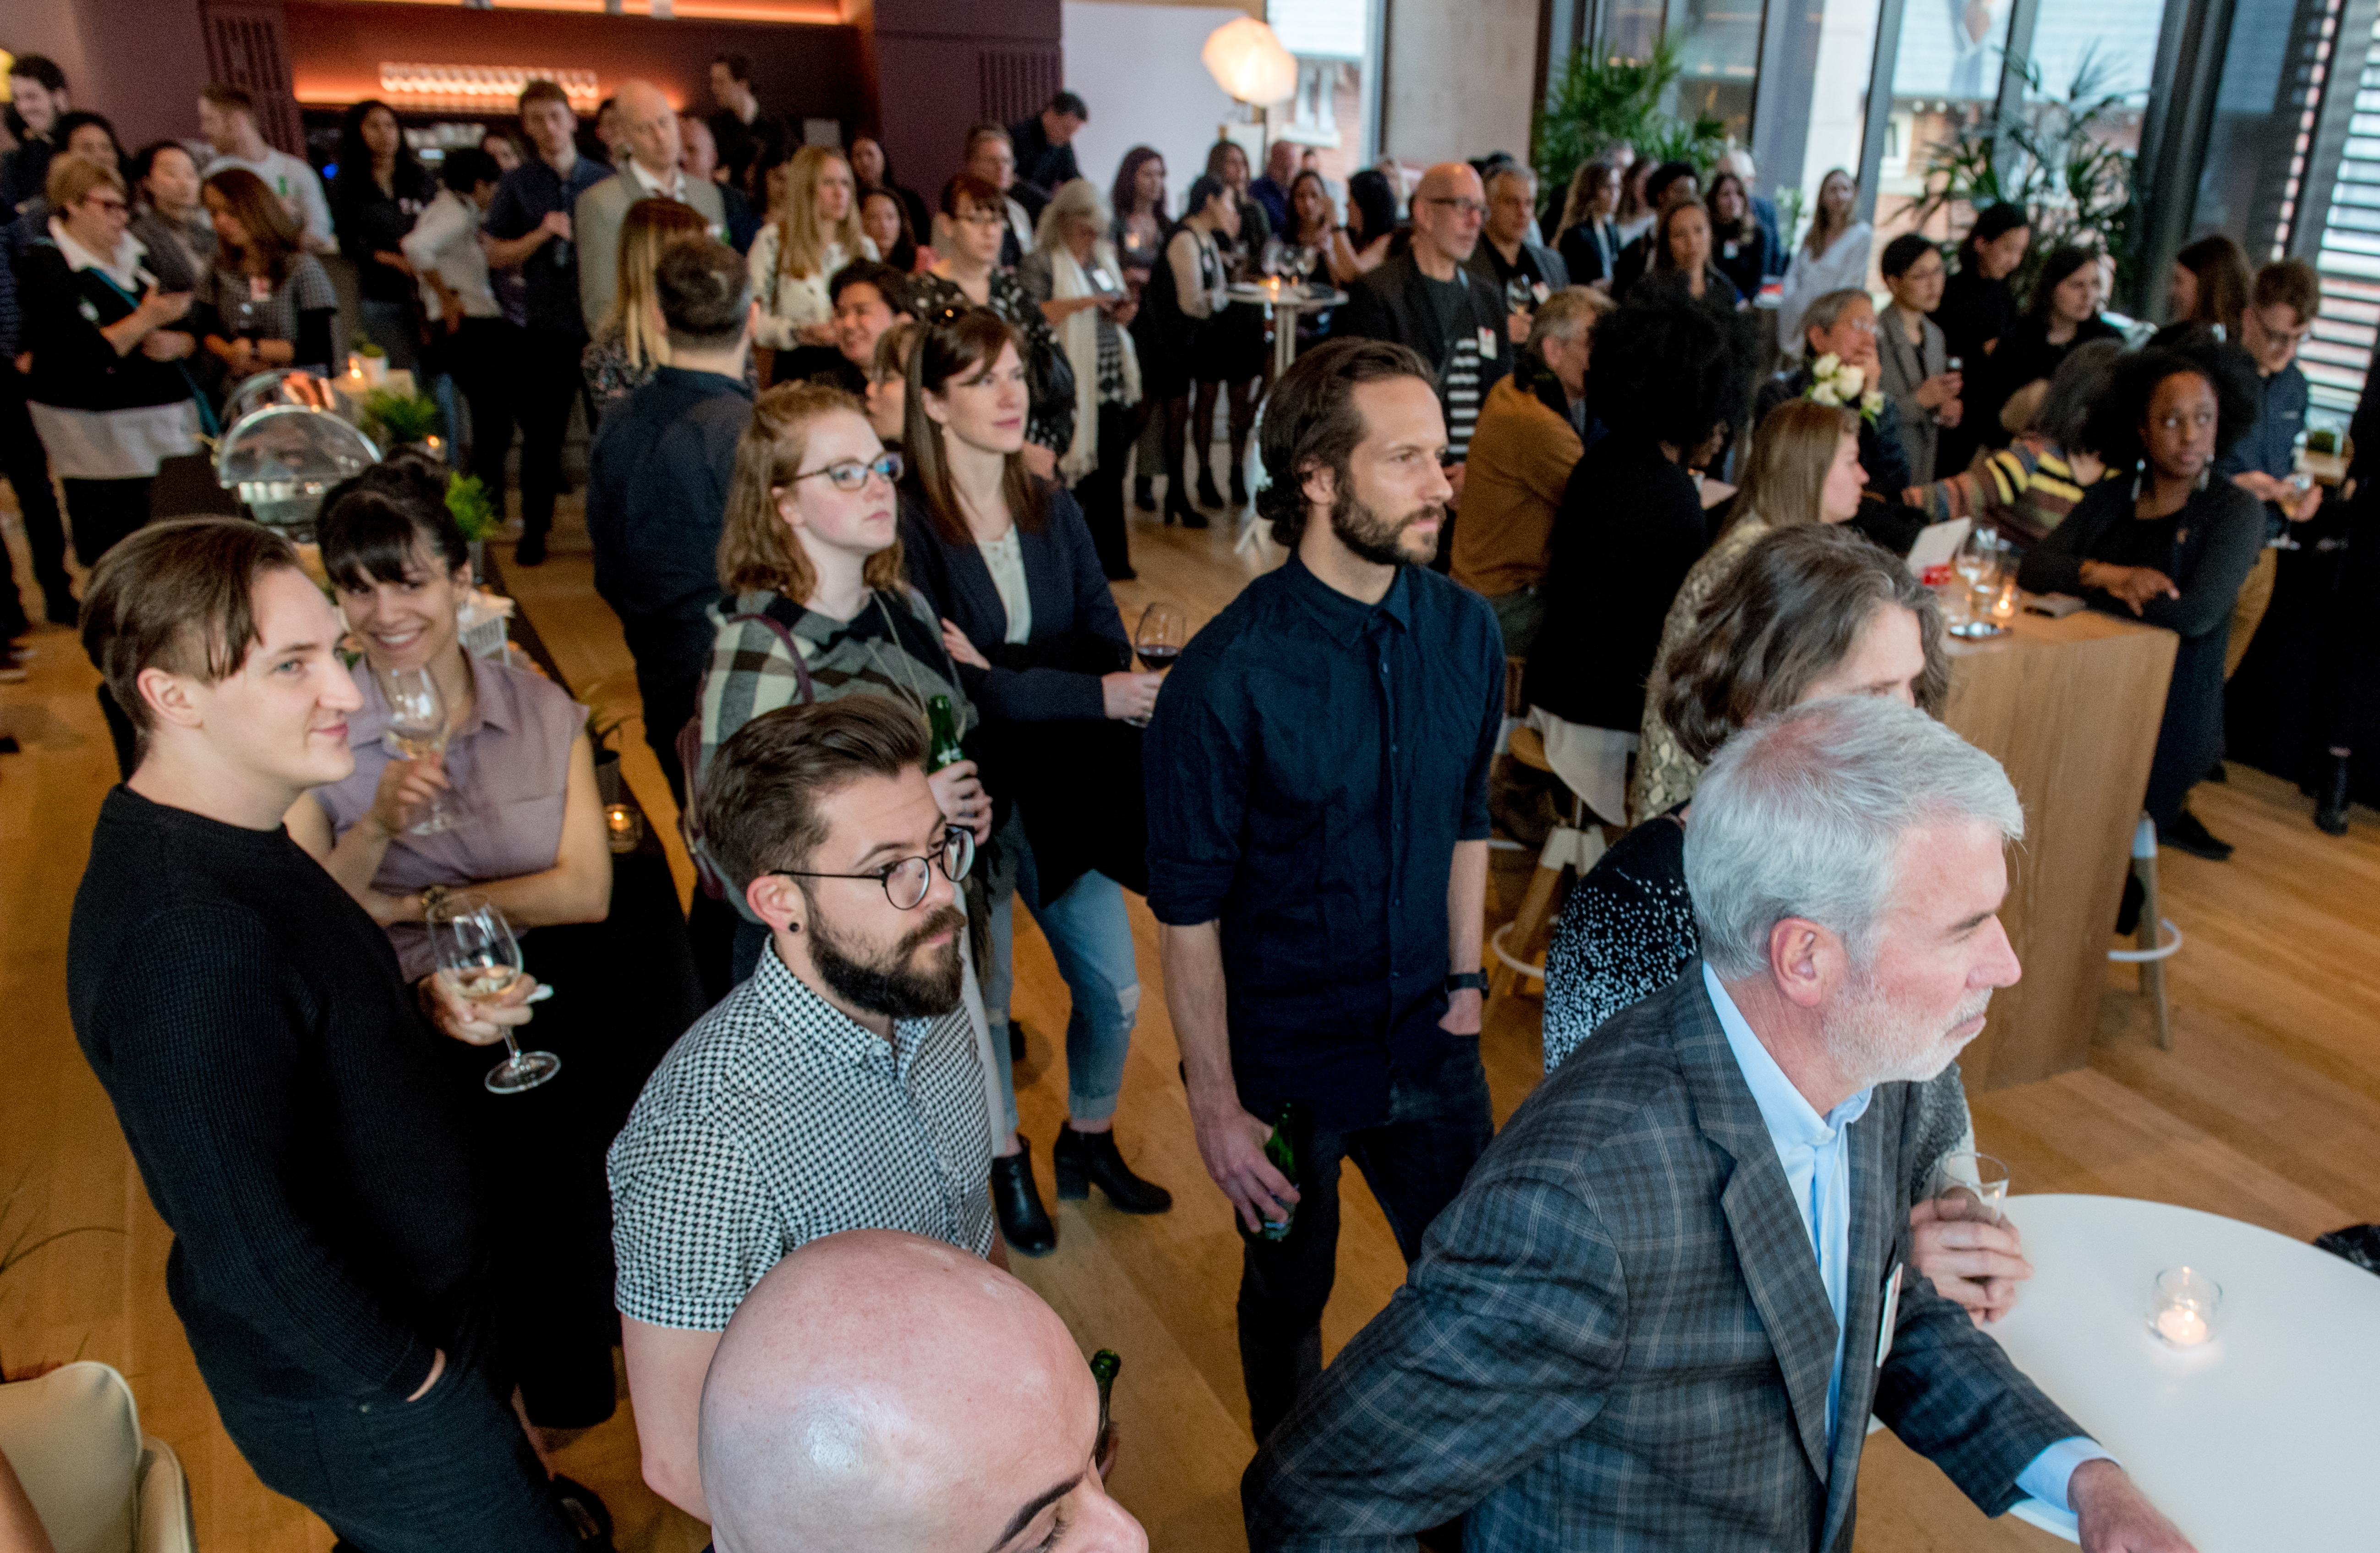 The Official Formica Canada Inc. Launch Evening in Toronto at the Gardiner Museum